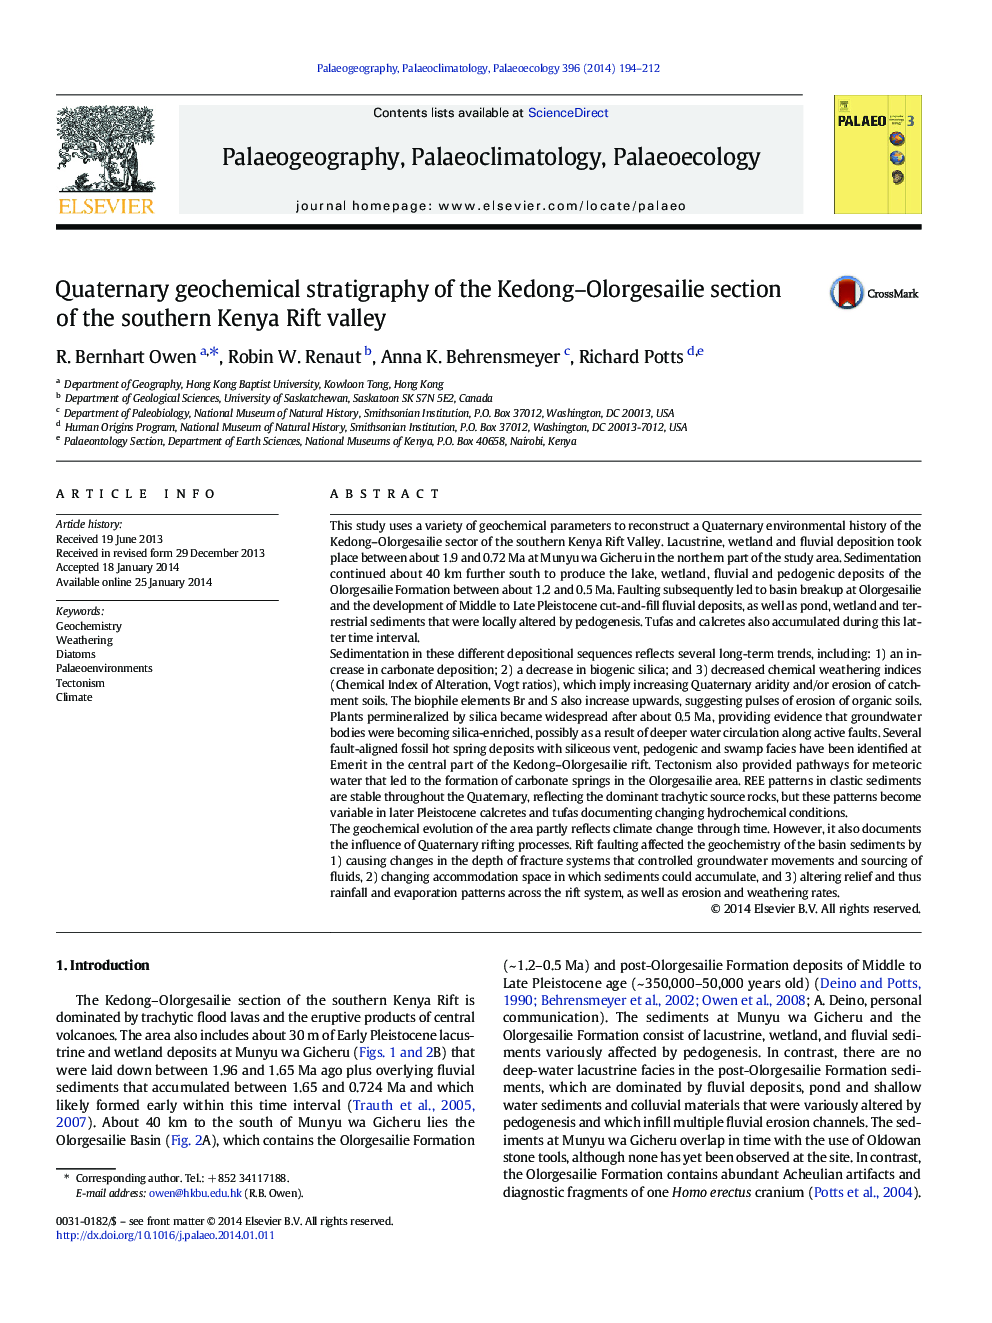 Quaternary geochemical stratigraphy of the Kedong–Olorgesailie section of the southern Kenya Rift valley